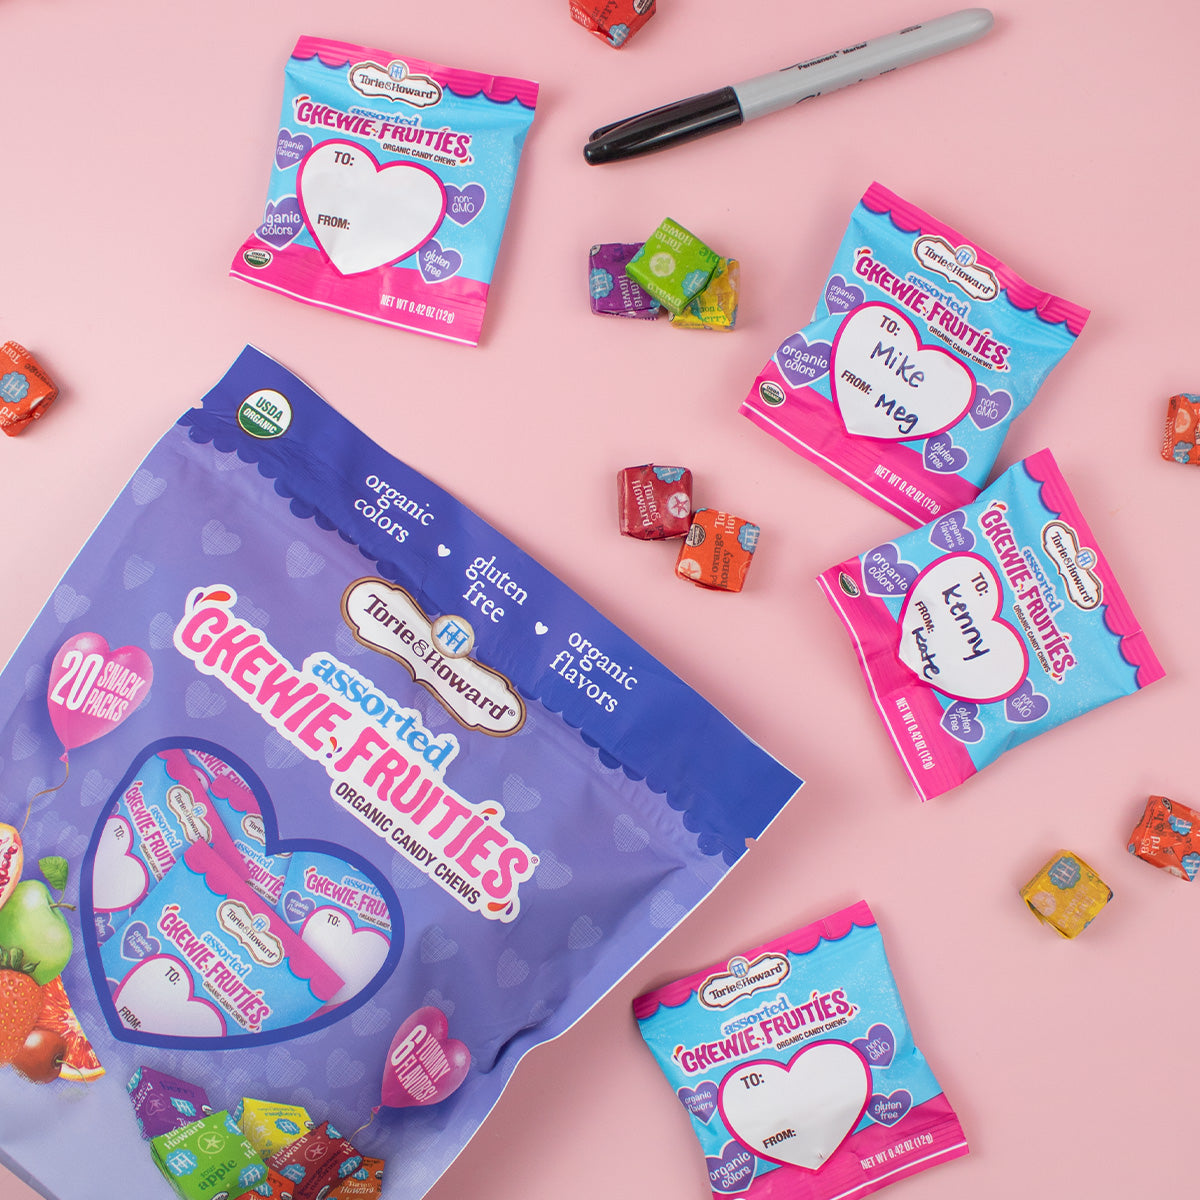 Chewie Fruities Organic Valentine Candy 8.46oz Bag with inner pouches and individually wrapped candies around the bag